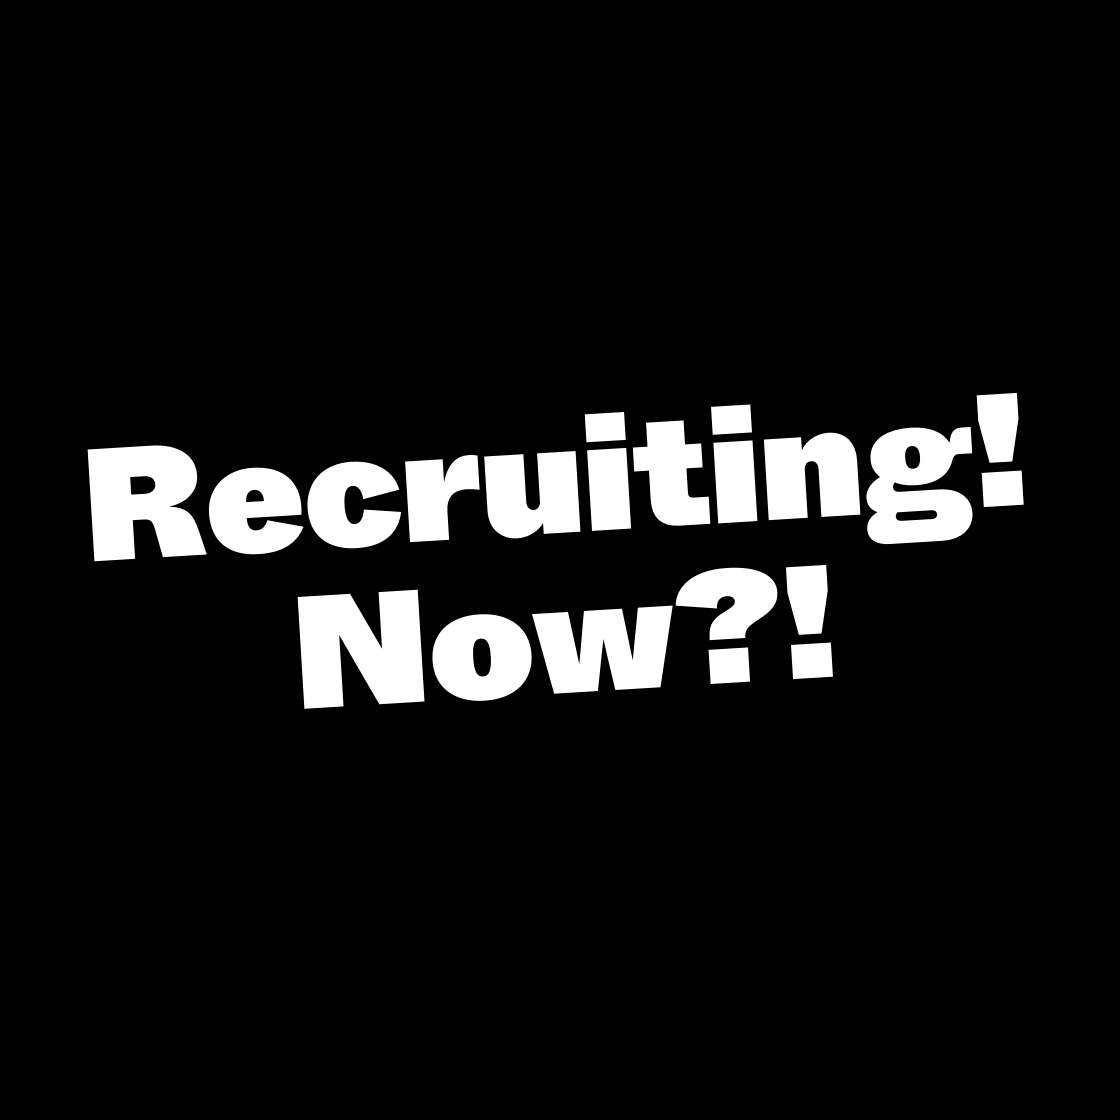 Recruiting! Now?!